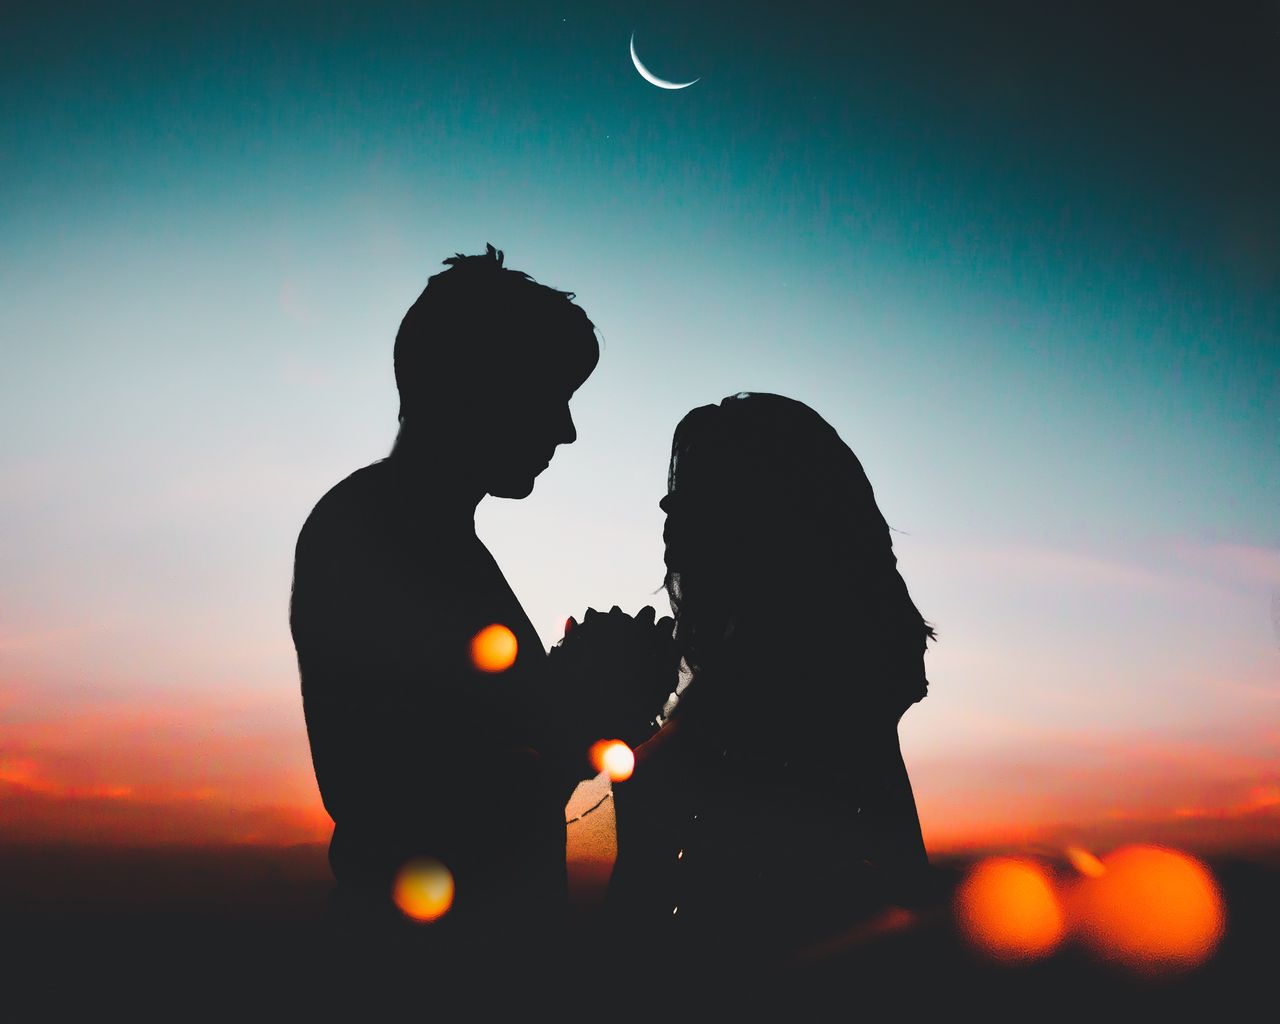 Download wallpaper 1280x1024 couple, silhouettes, night, love, sky standard  5:4 hd background